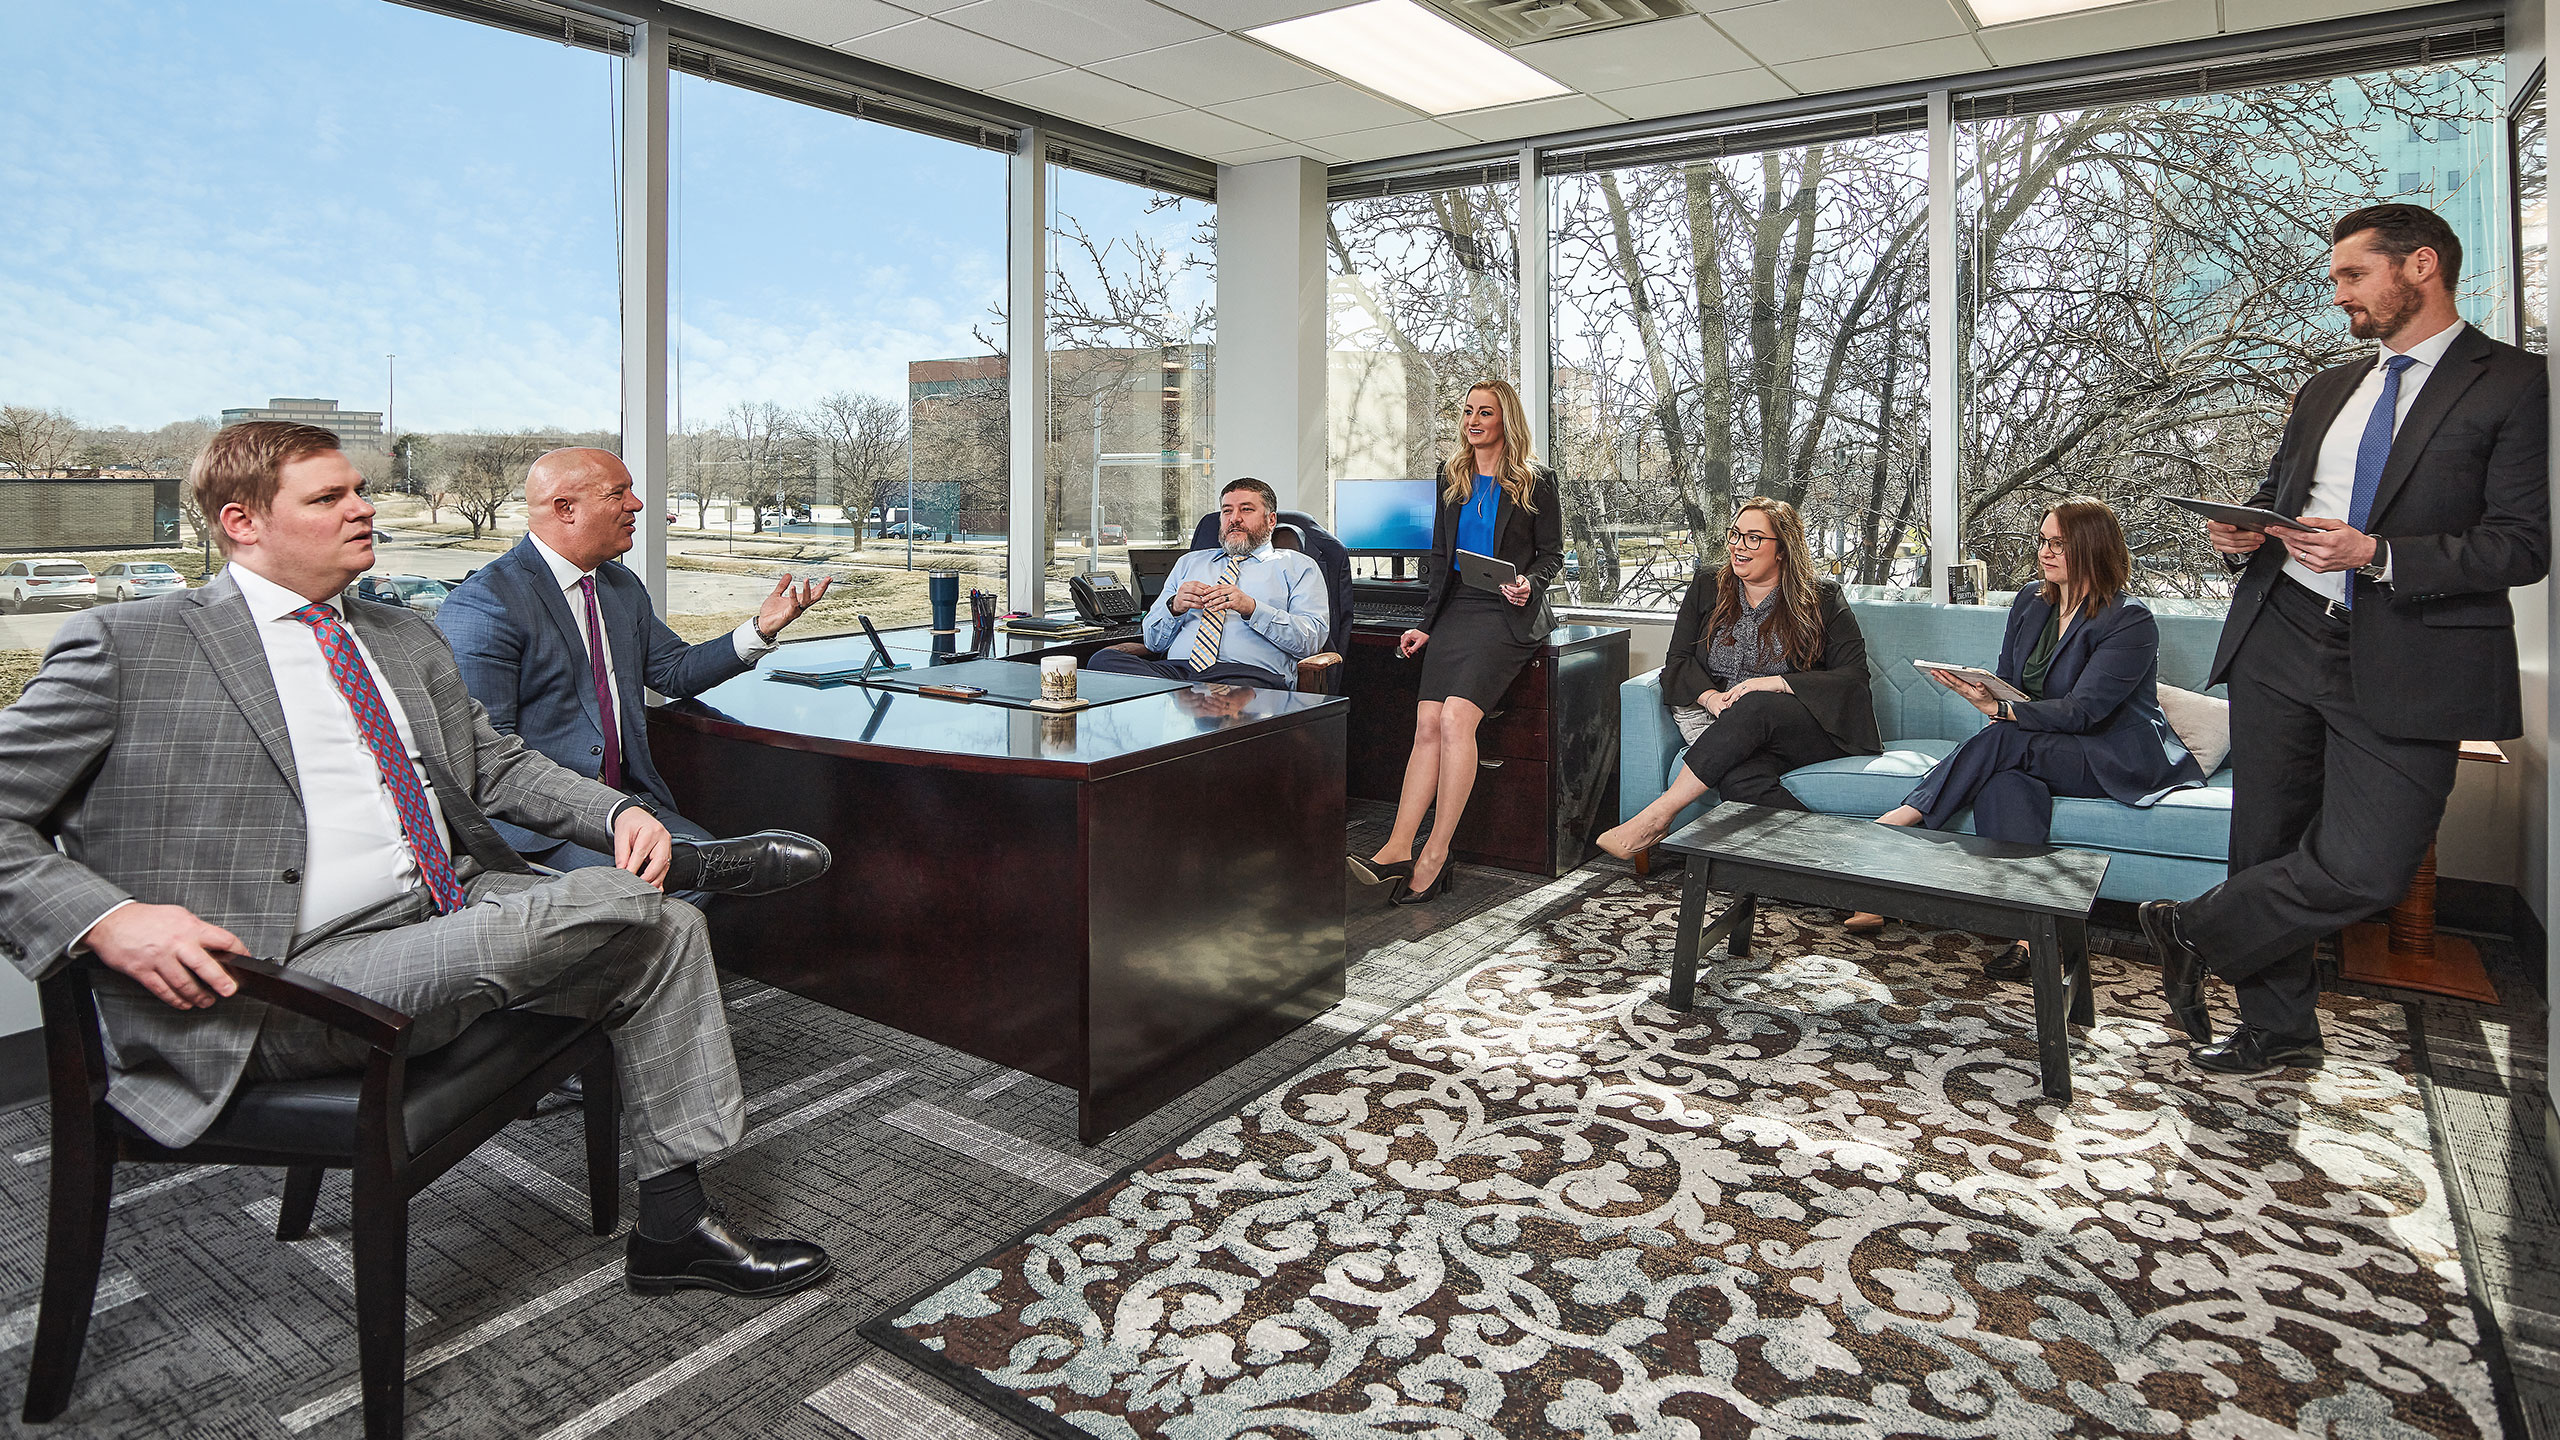 Law Firm Attorney Photography